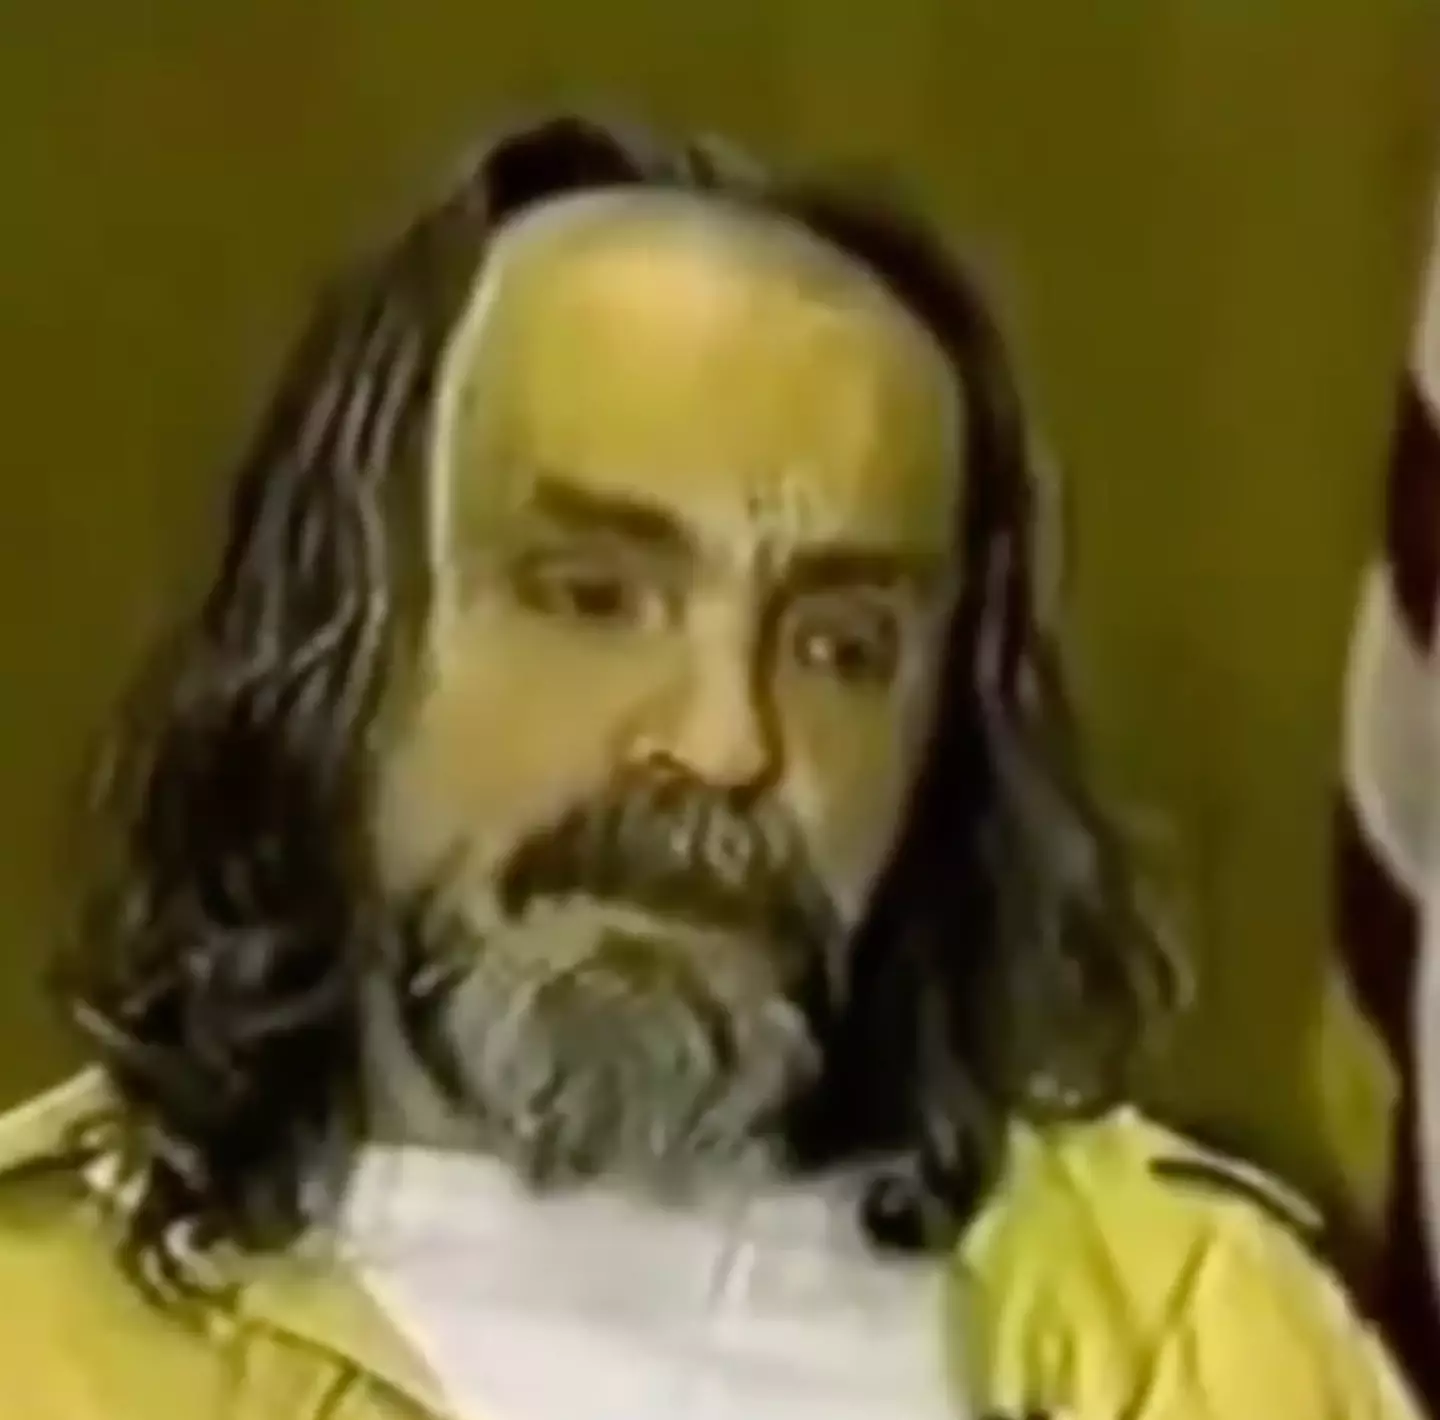 Manson was found guilty of ordering the murders.